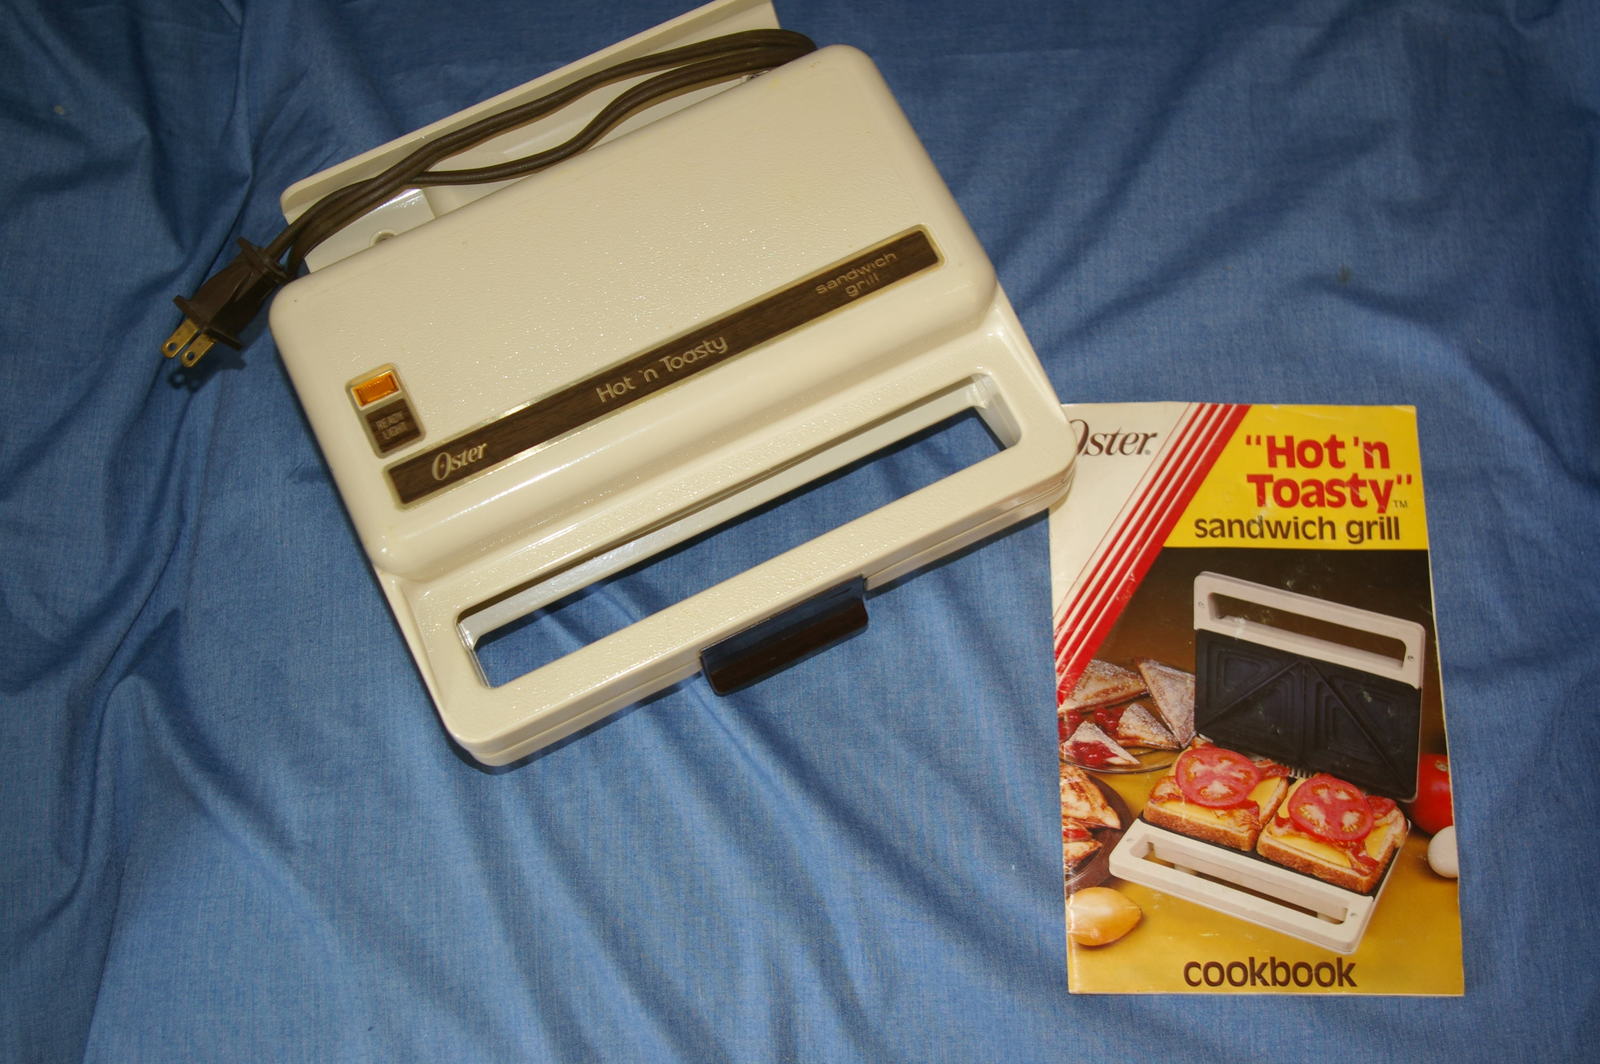 Oster Hot N’ Toasty Sandwich Grill 713-06A Vintage with User Manual and Recipes - $25.00